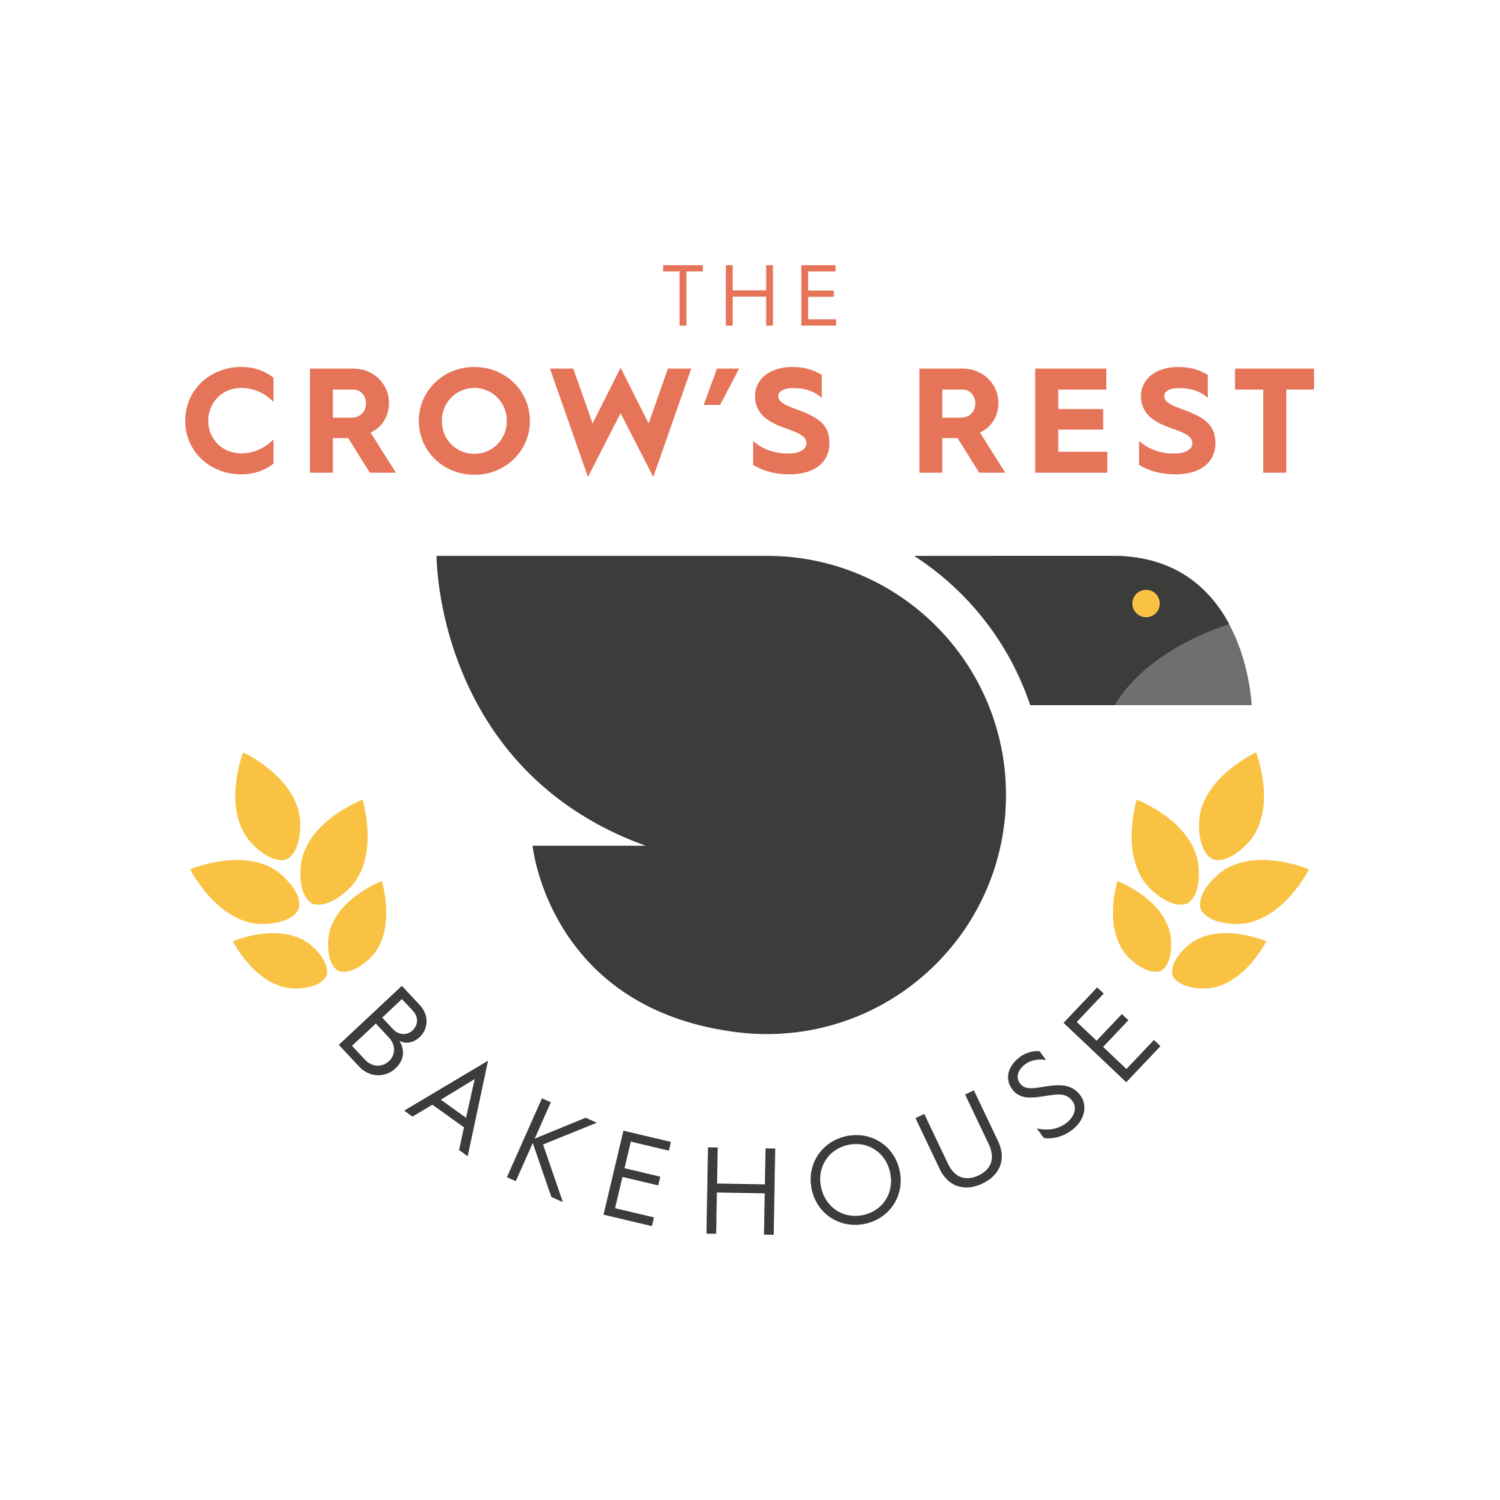 The Crow's Rest Bakehouse